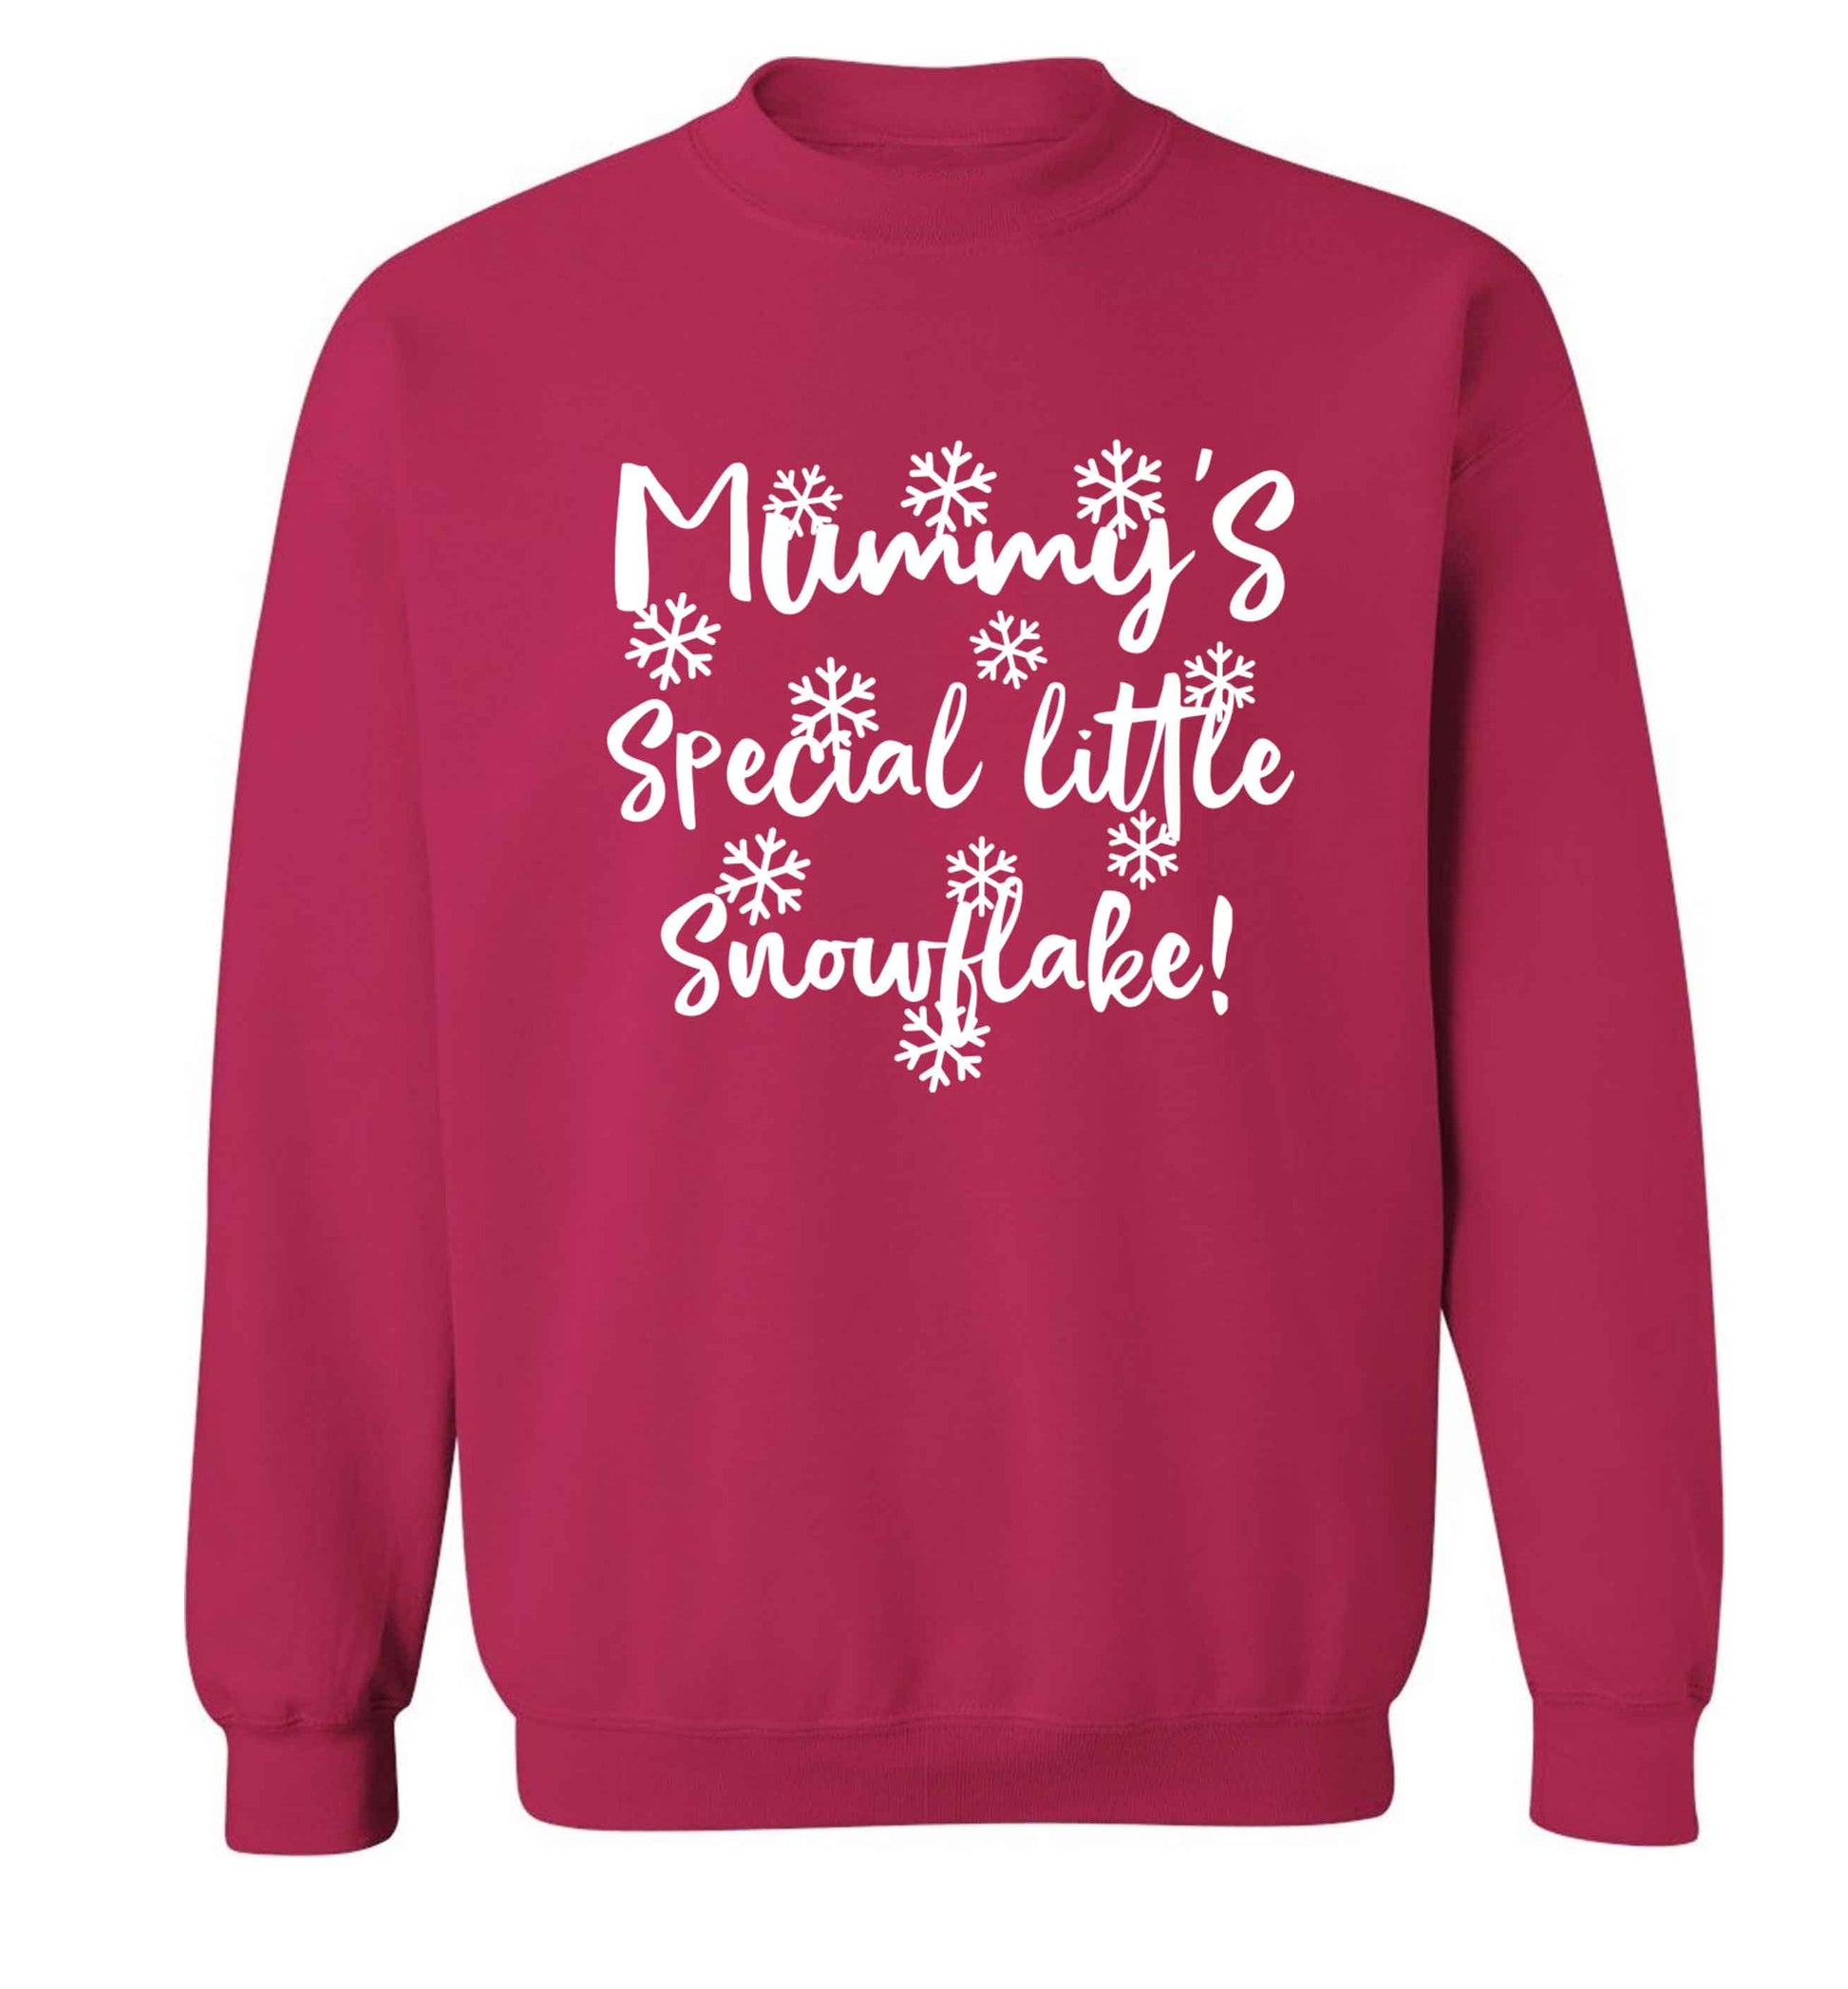 Mummy's special little snowflake Adult's unisex pink Sweater 2XL